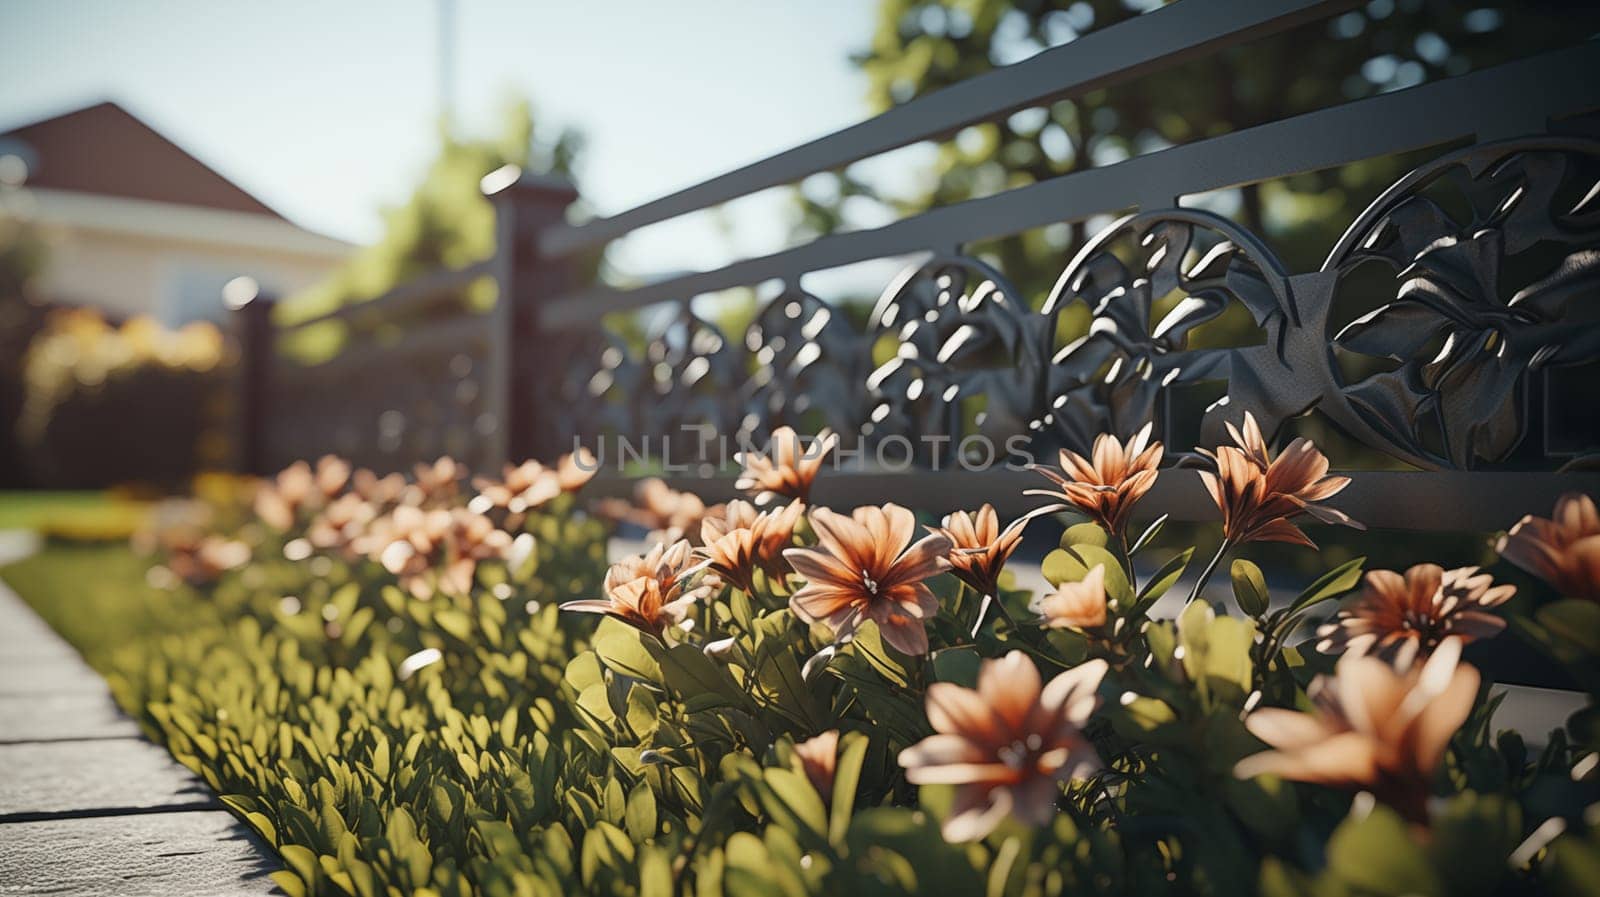 Ornate garden fence with a vibrant display of blooming flowers in a sunny suburban landscape by Zakharova